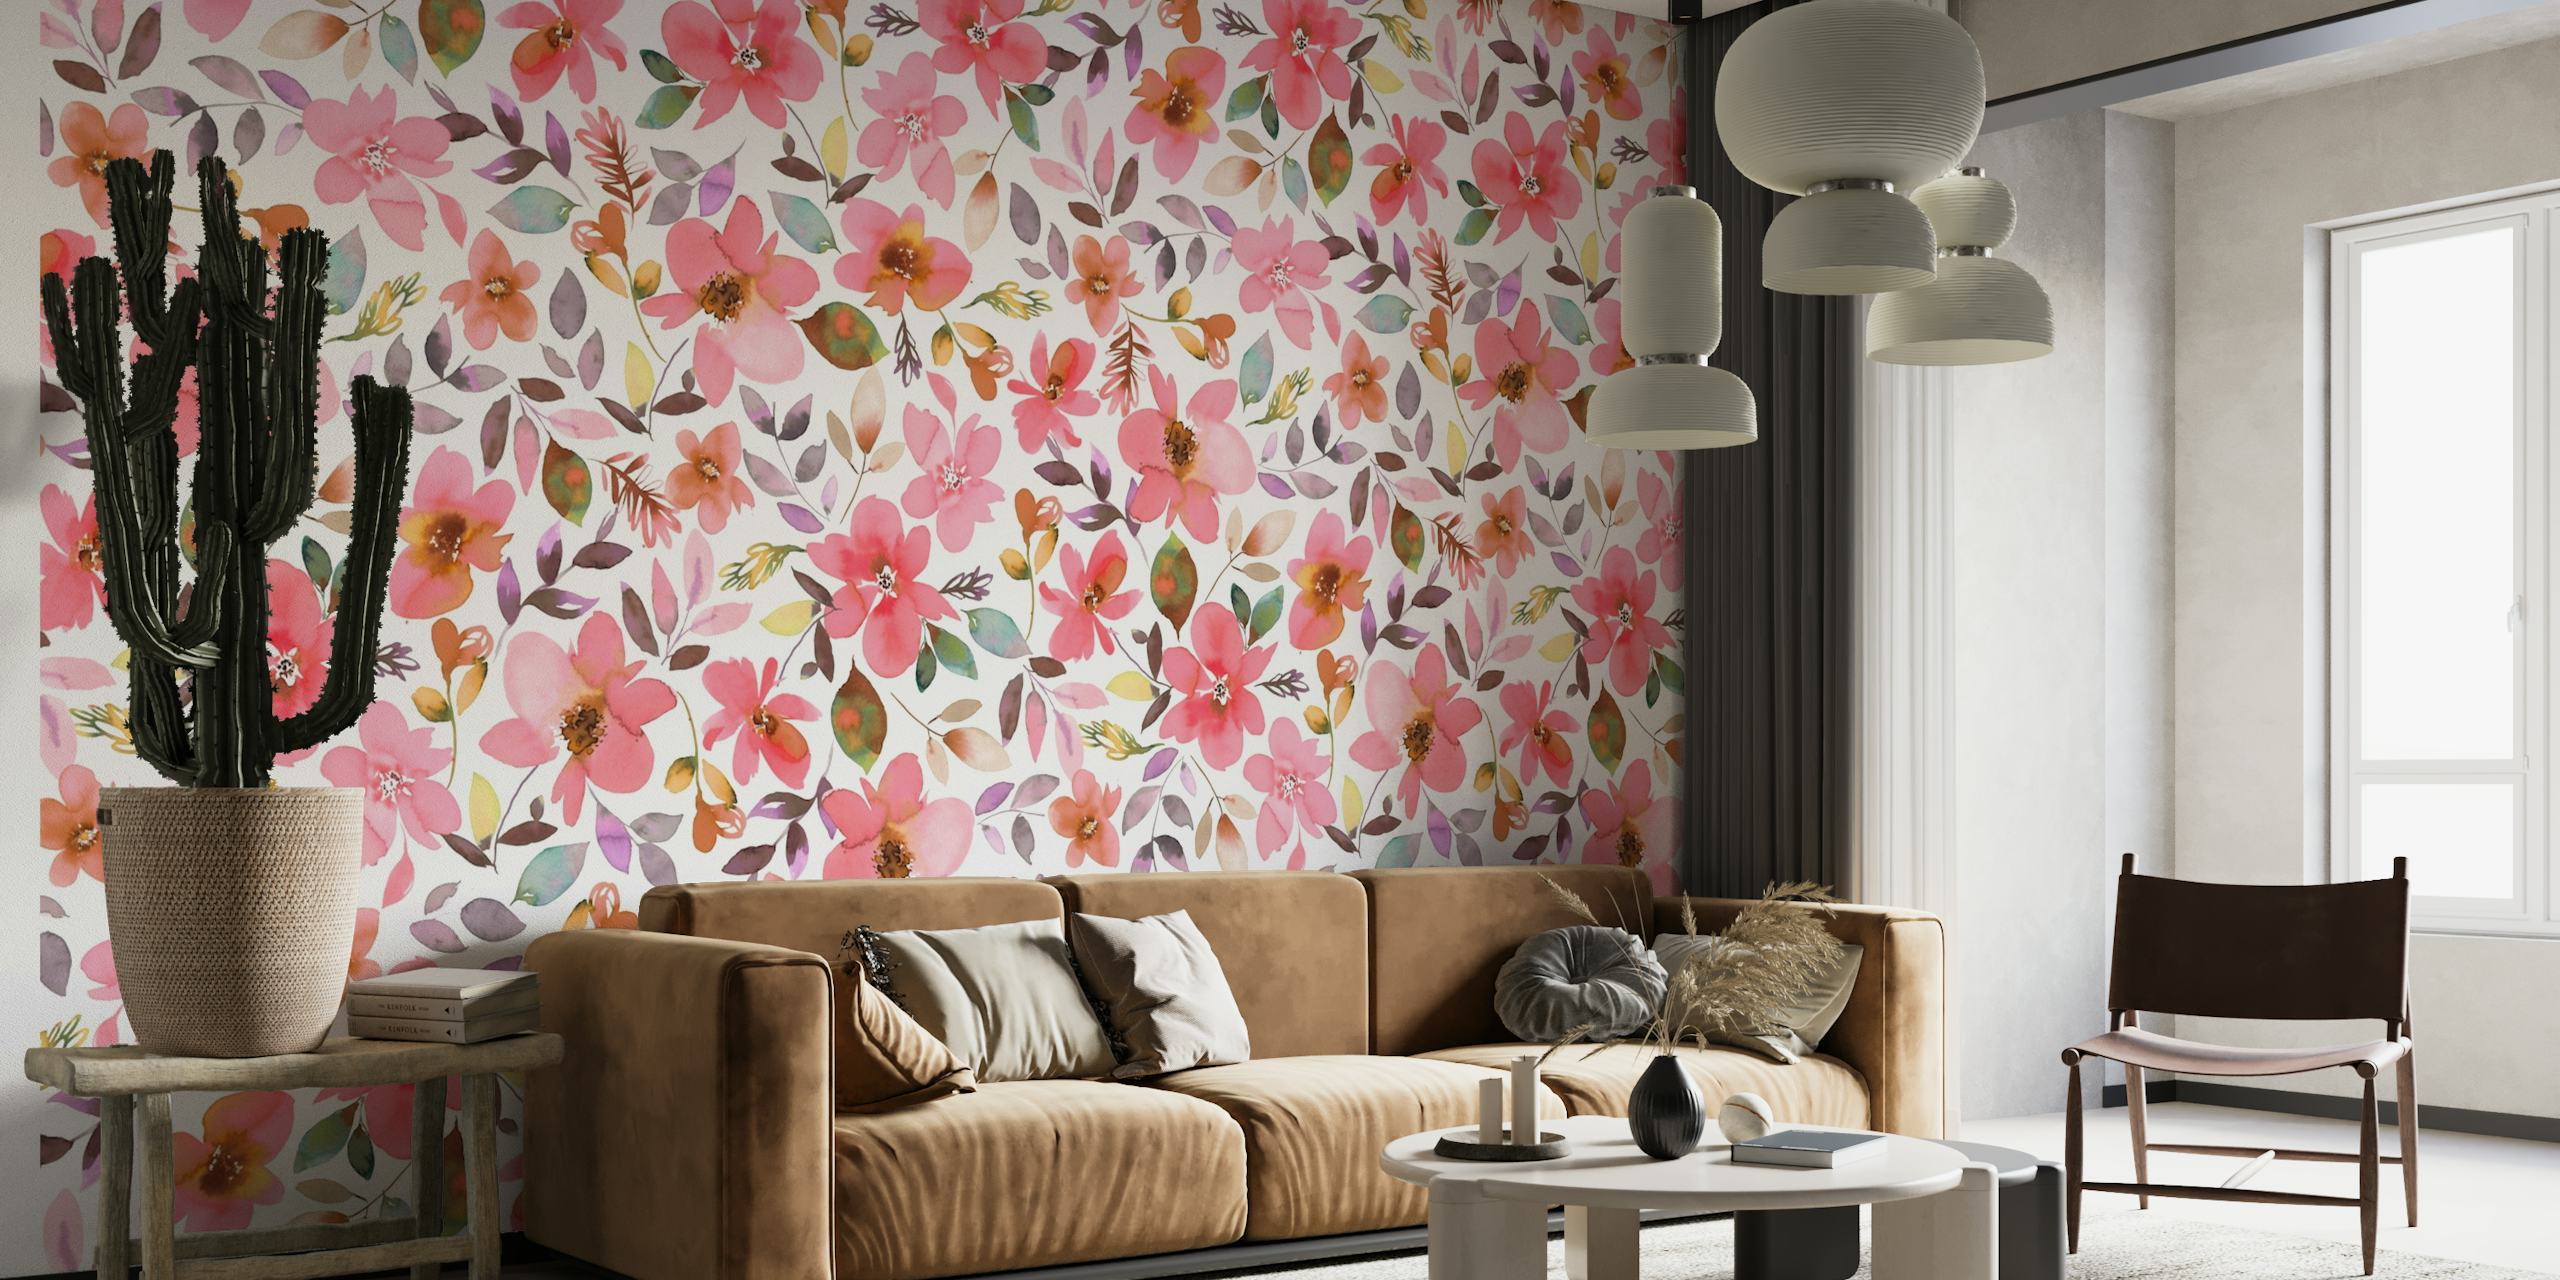 A colorful wall mural with coral flowers and tropical plants creating a lively summer theme.